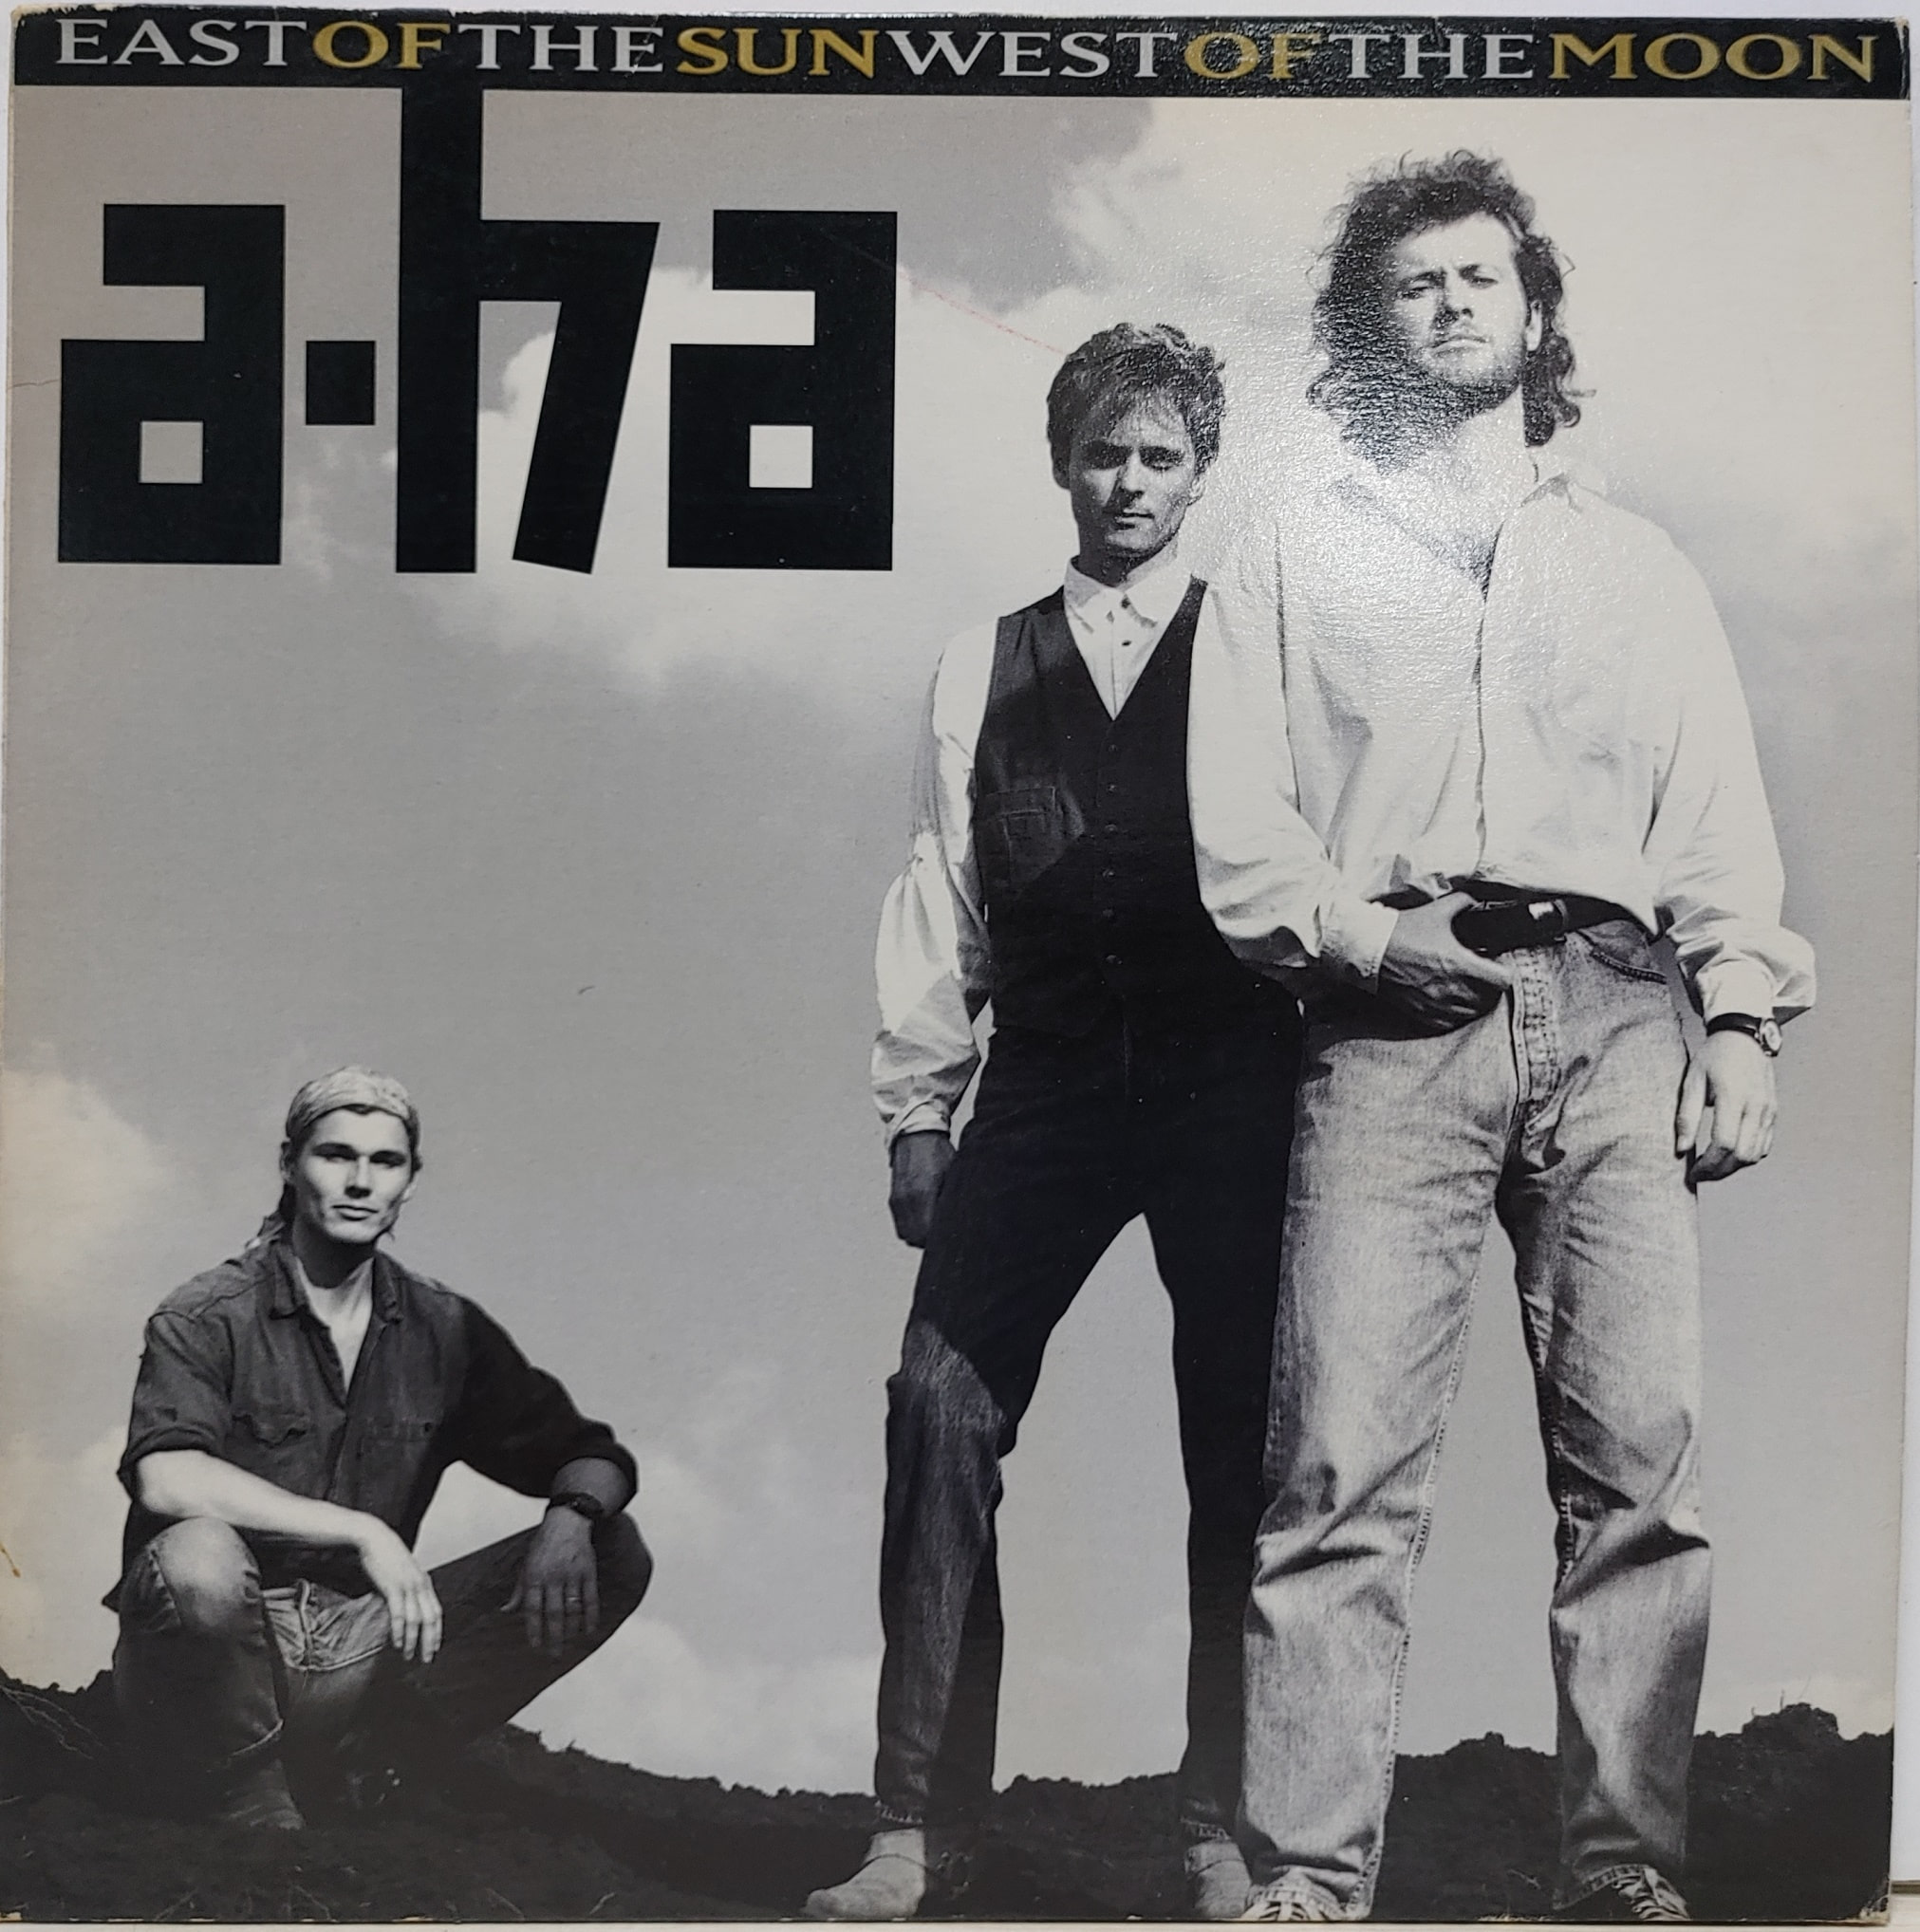 A-HA / EAST OF THE SUN WEST OF THE MOON